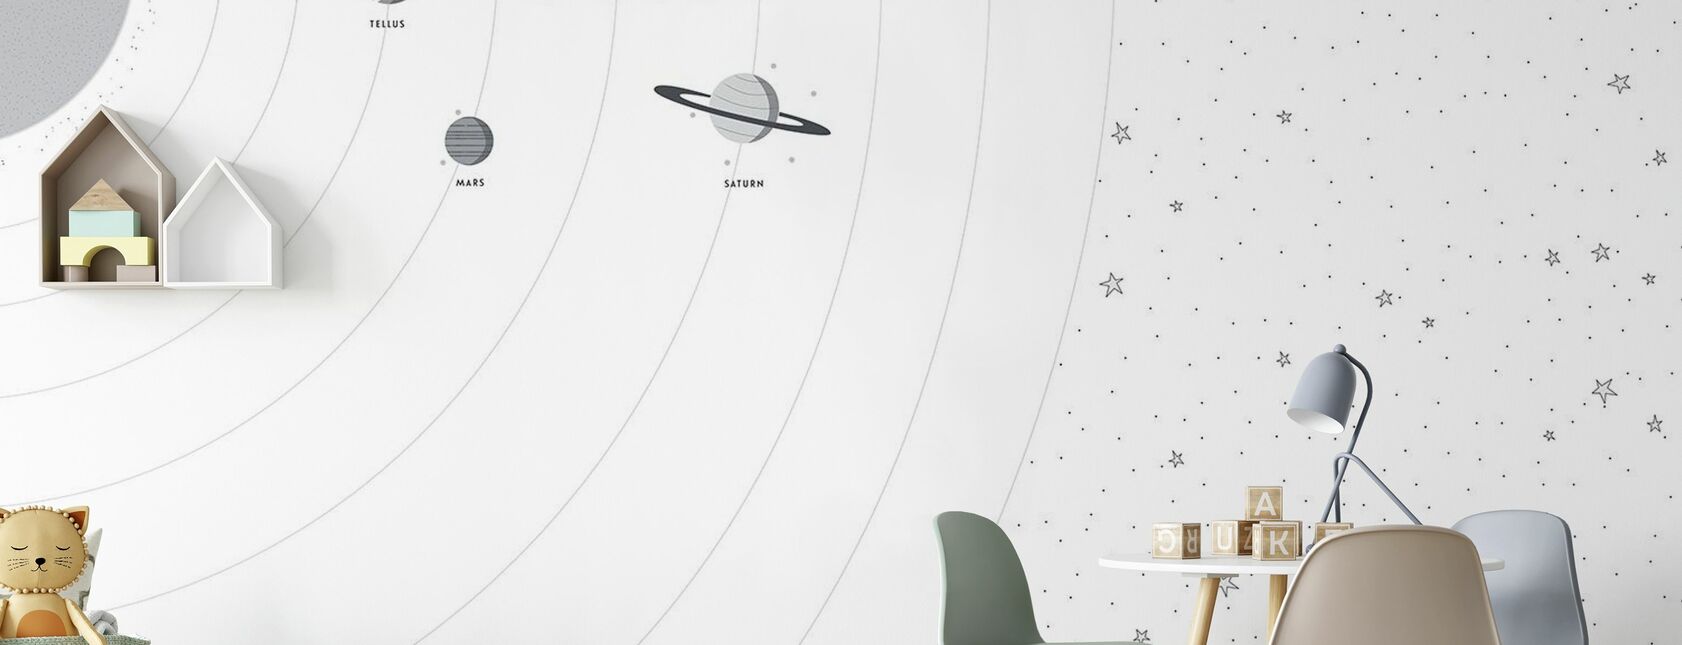 Planets and Stars - Wallpaper - Kids Room